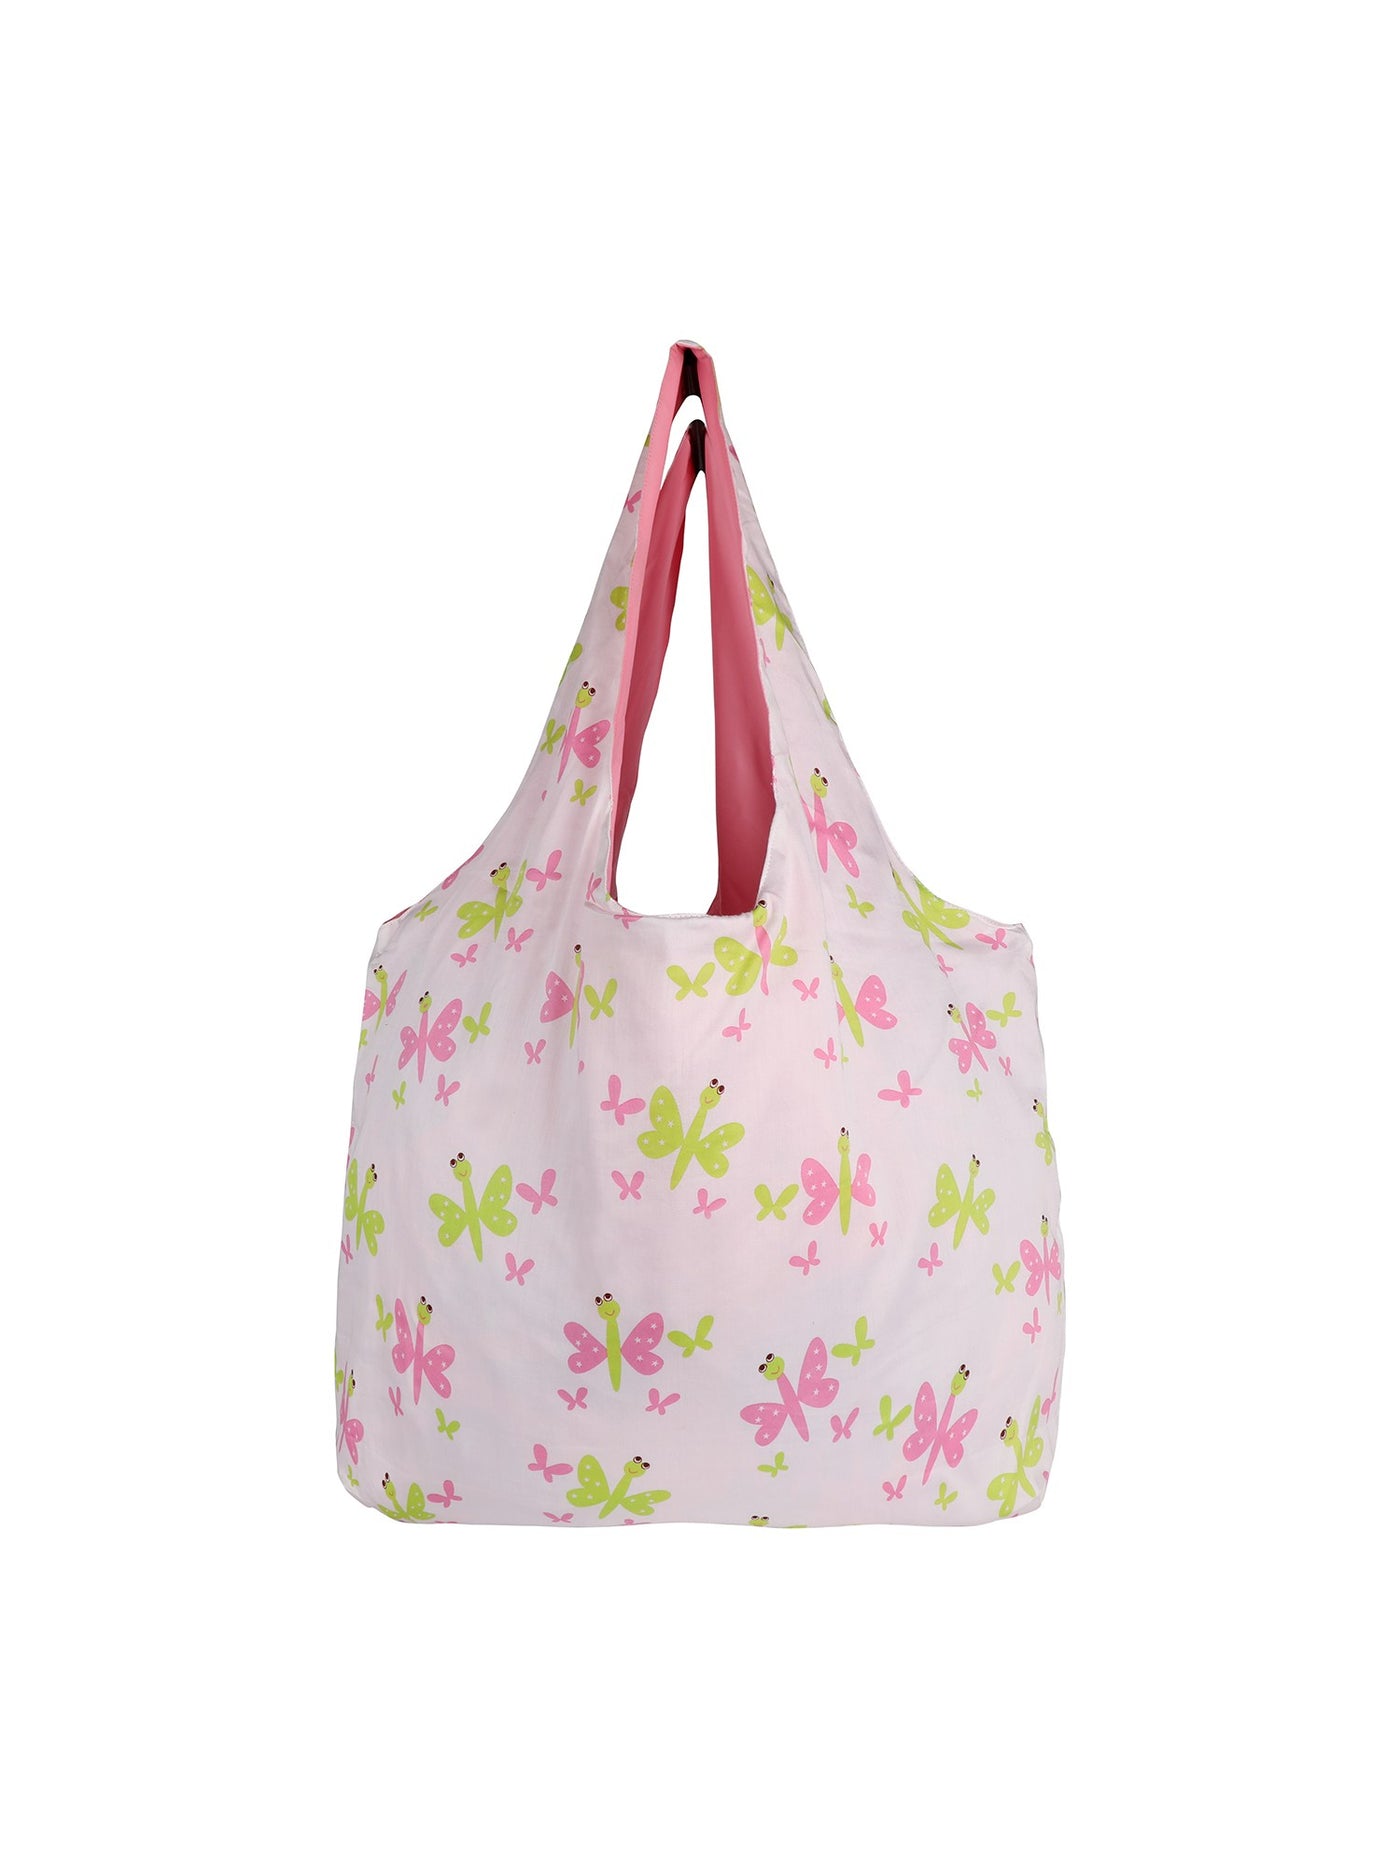 Butterfly (White) Tote Bag